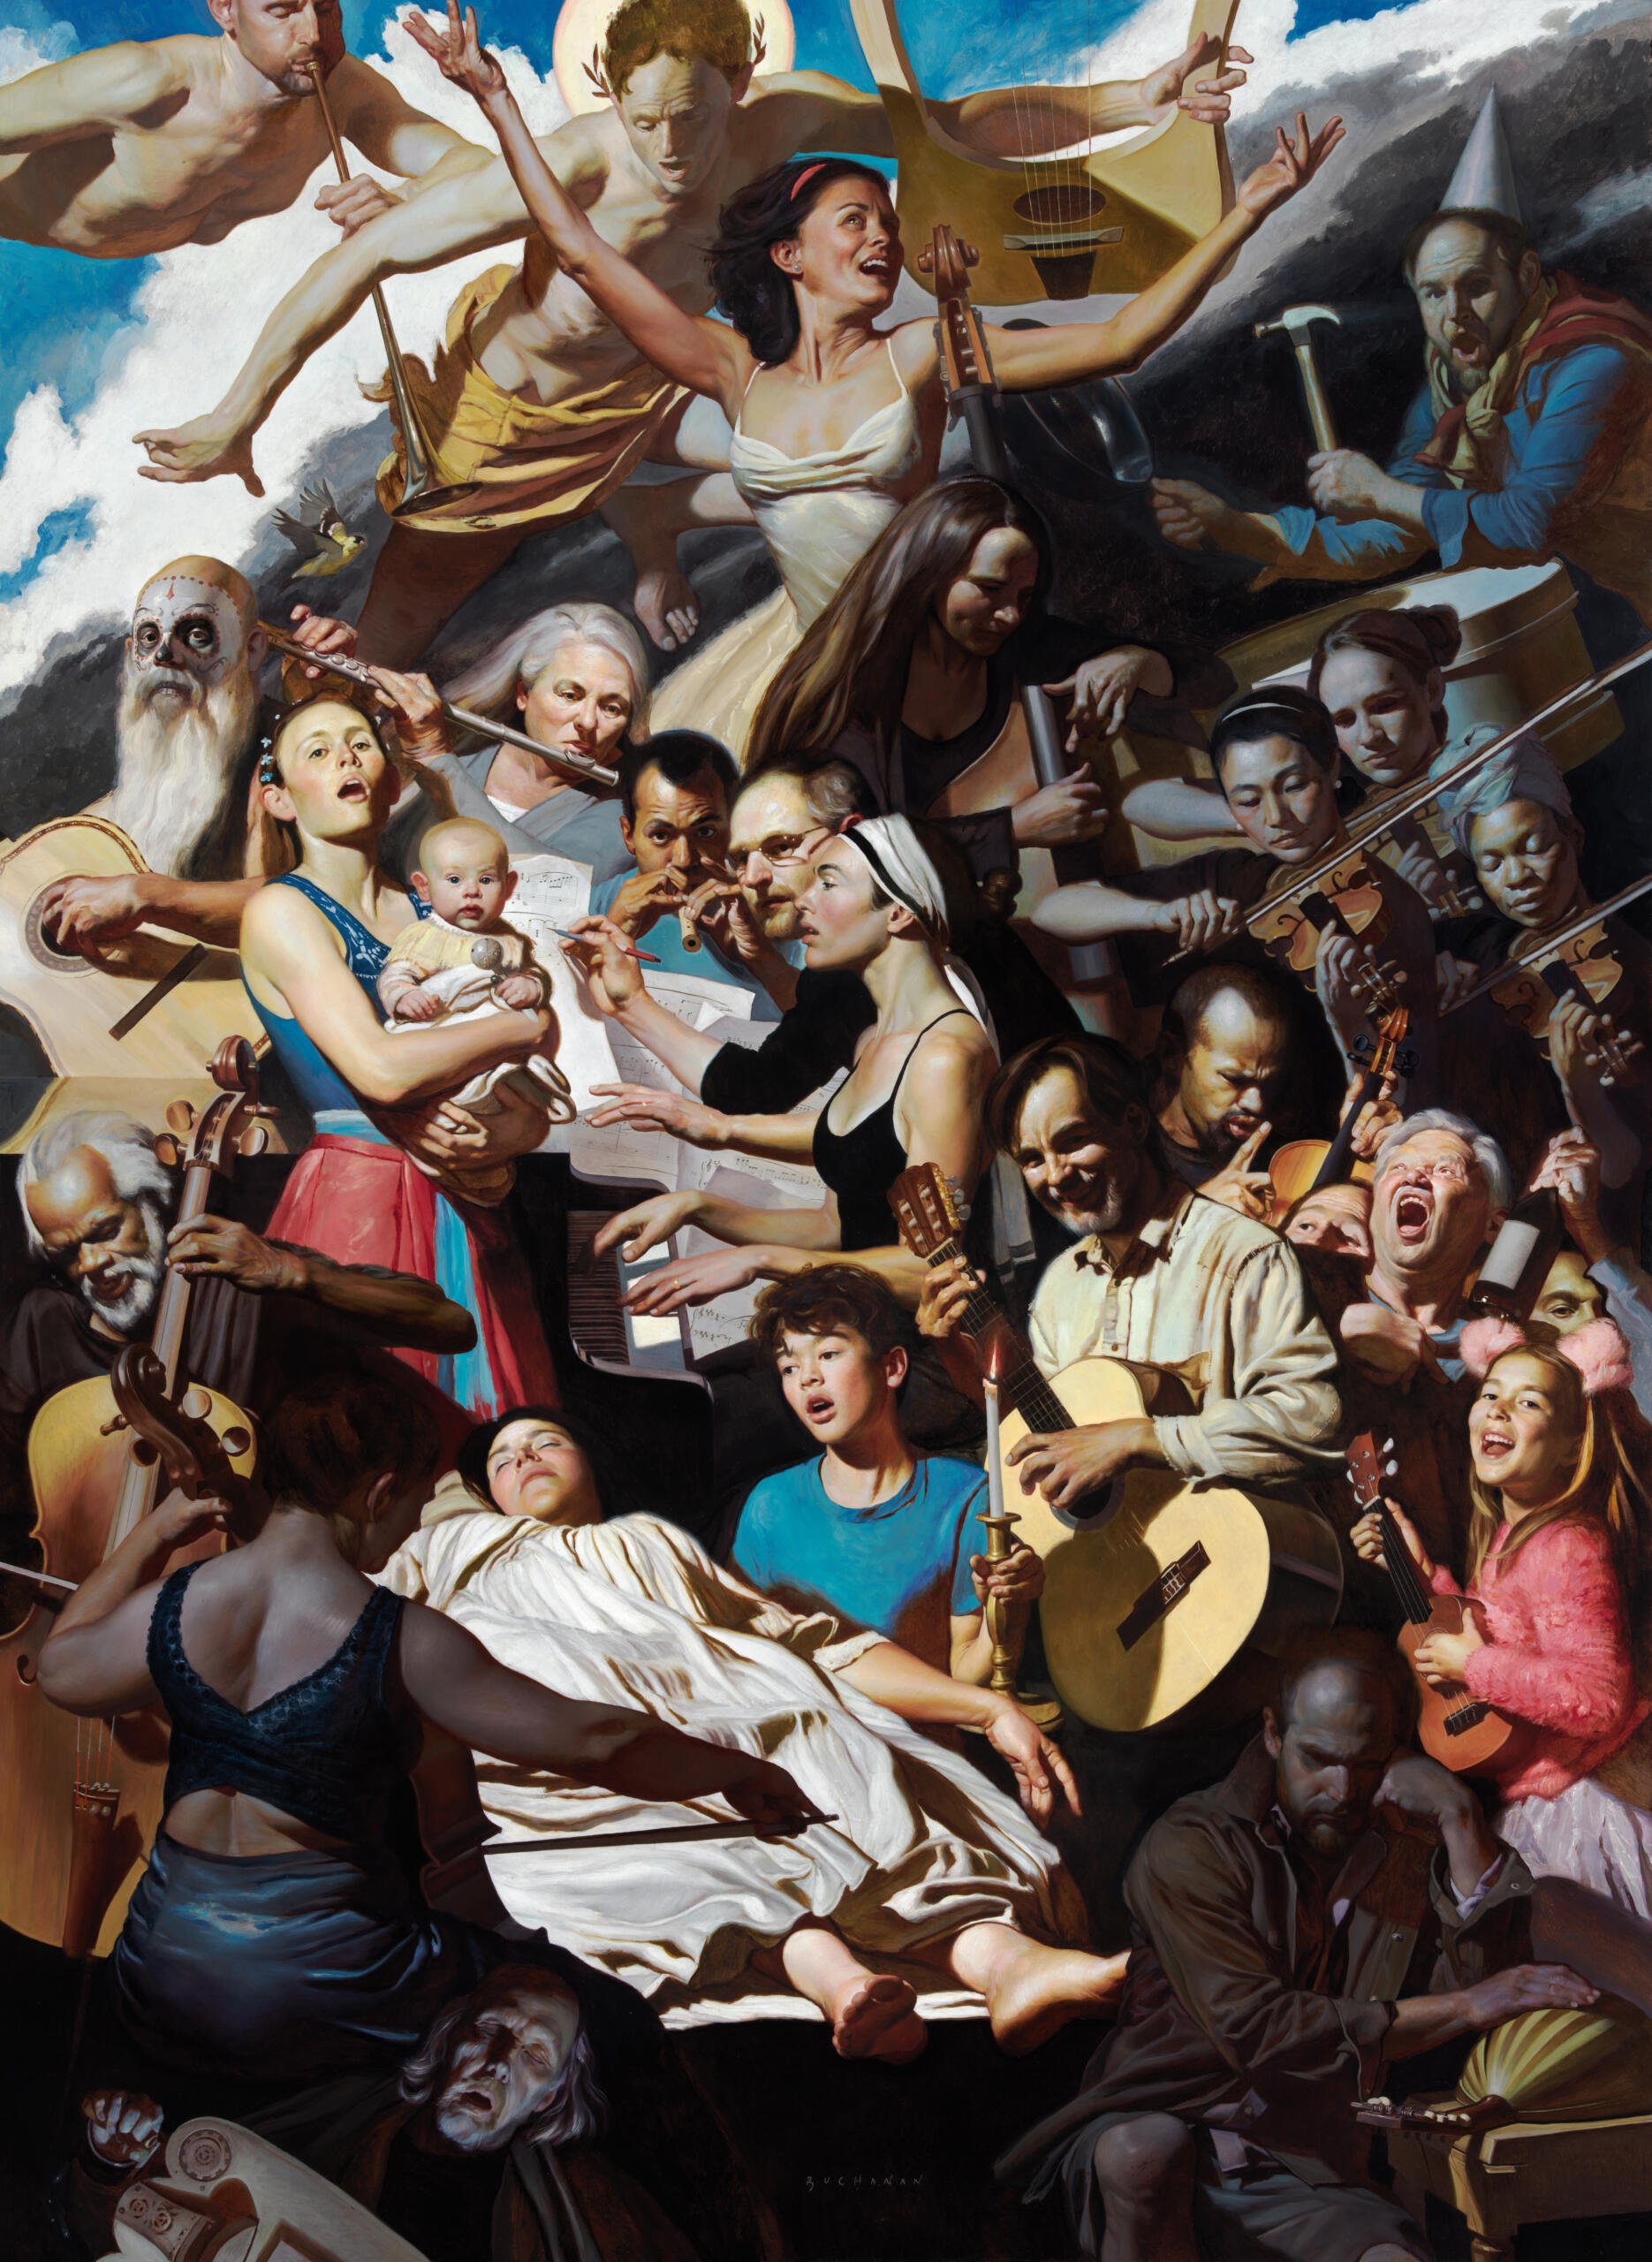 Renaissance-inspired painting of people of various ages singing or playing handheld instruments overlapping so that many are far above the ground